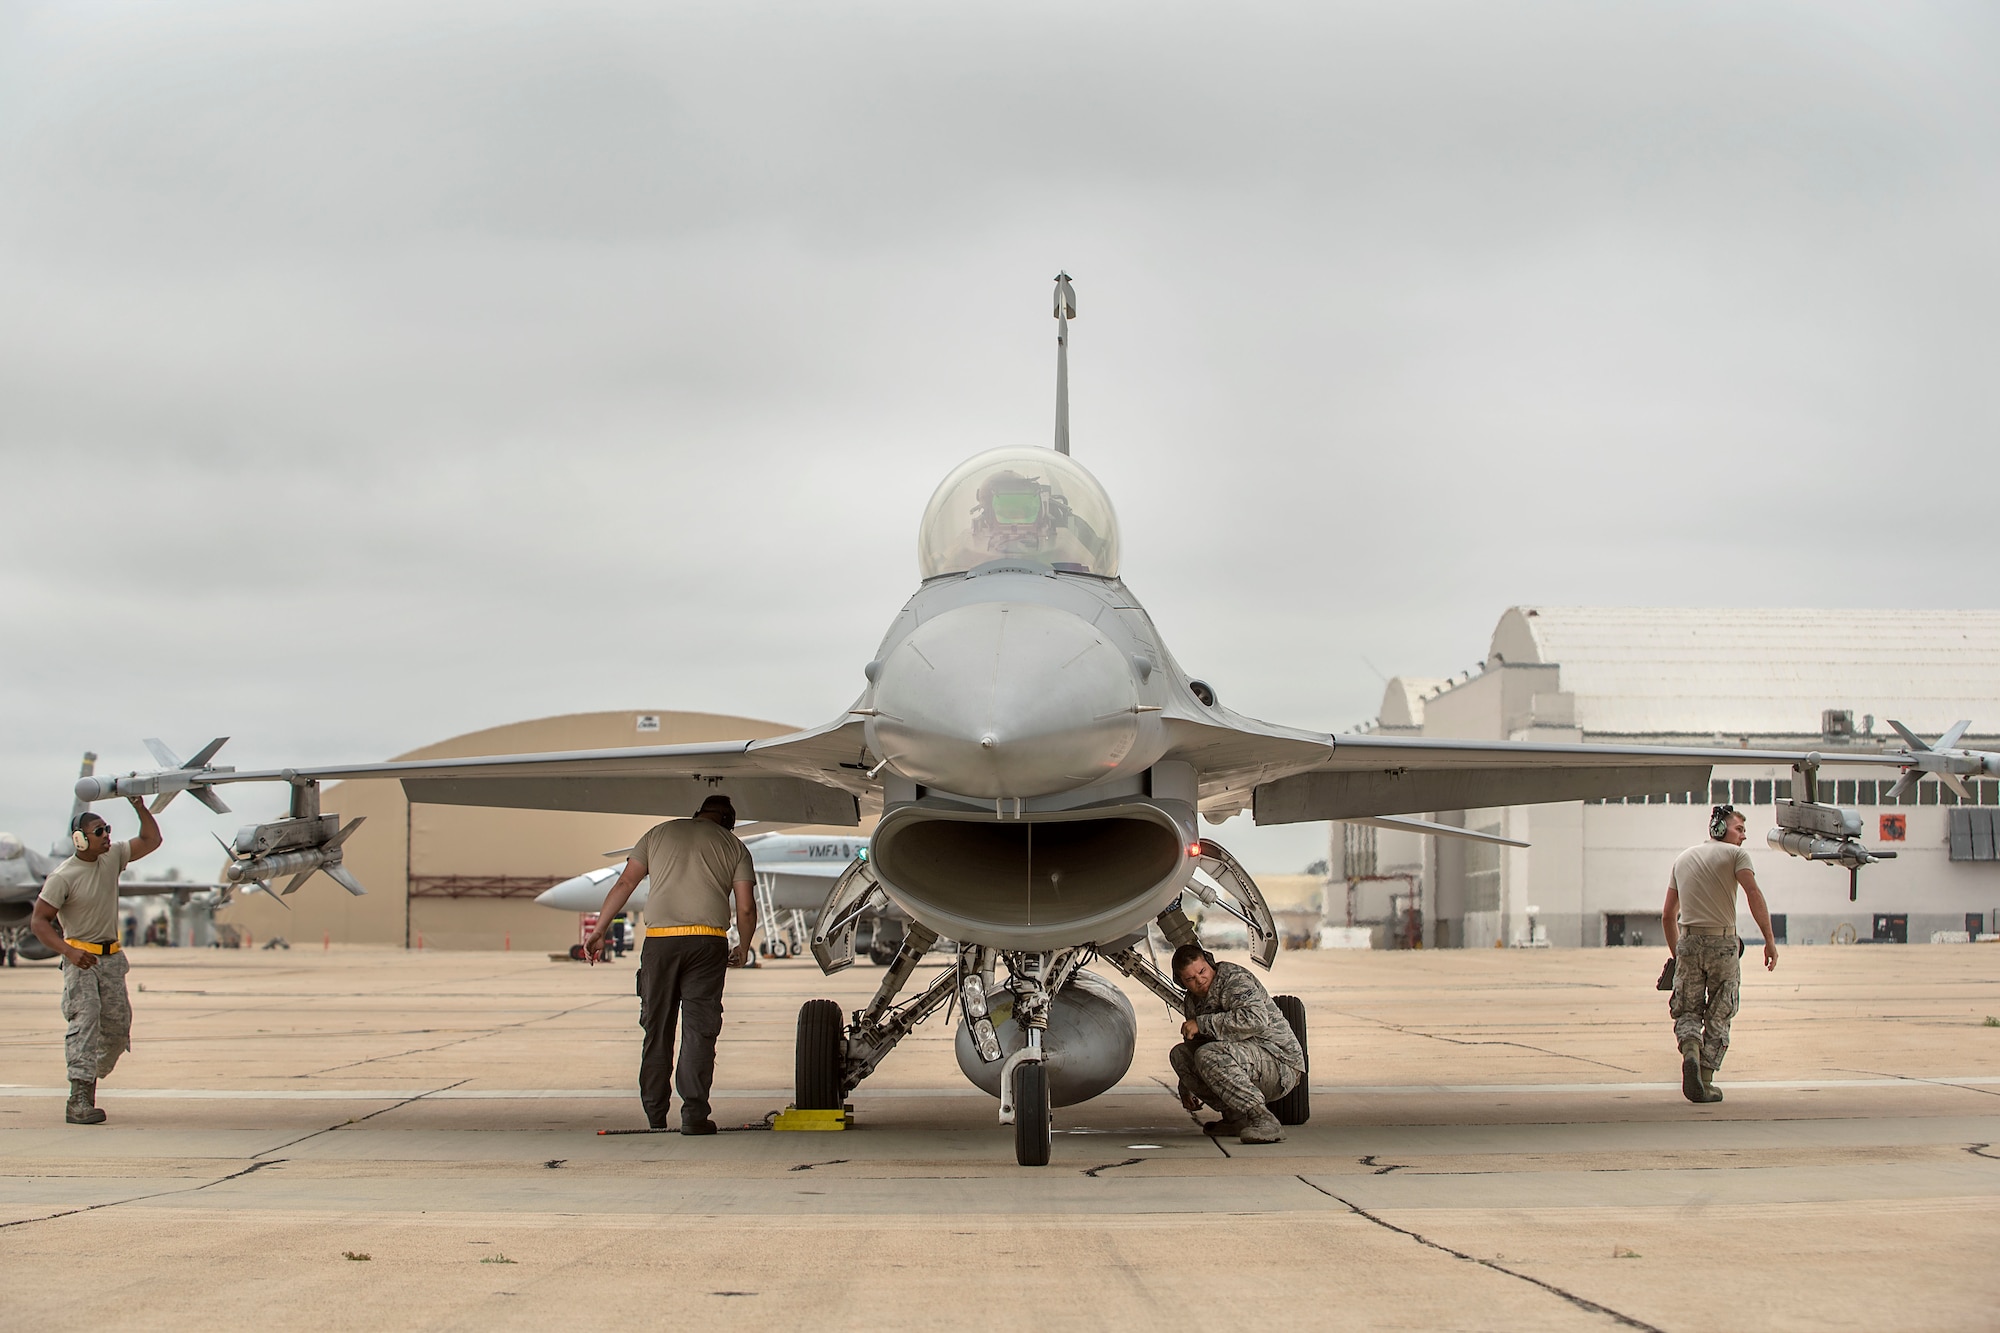 Airmen from the 314th Aircraft Maintenance Unit ensure weapons are loaded to a 314th Fighter Squadron F-16 VIper, prior to take off June 4, 2019, on Marine Corps Air Station Miramar, Calif. The 314th FS F-16 pilots conducted dissimiliar combat air training alongside F/A-18 Hornets from the Marine Fighter Attack Squadron 314. (U.S. Air Force photo by Staff Sgt. Christine Groening)